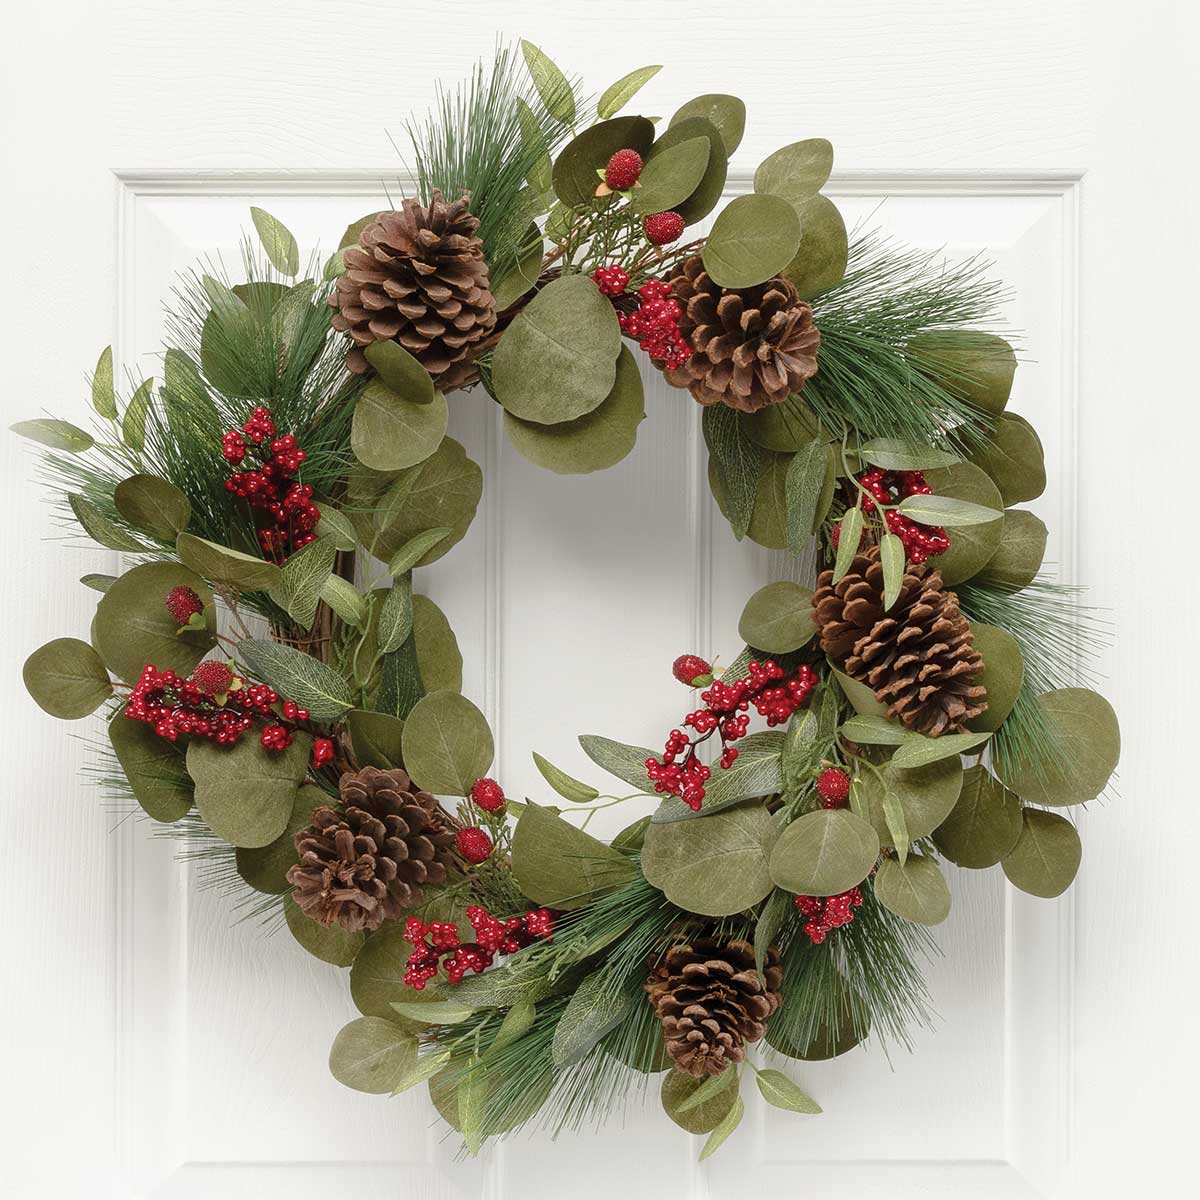 !MIXED EUCALYPTUS WREATH WITH WIRED STEMS